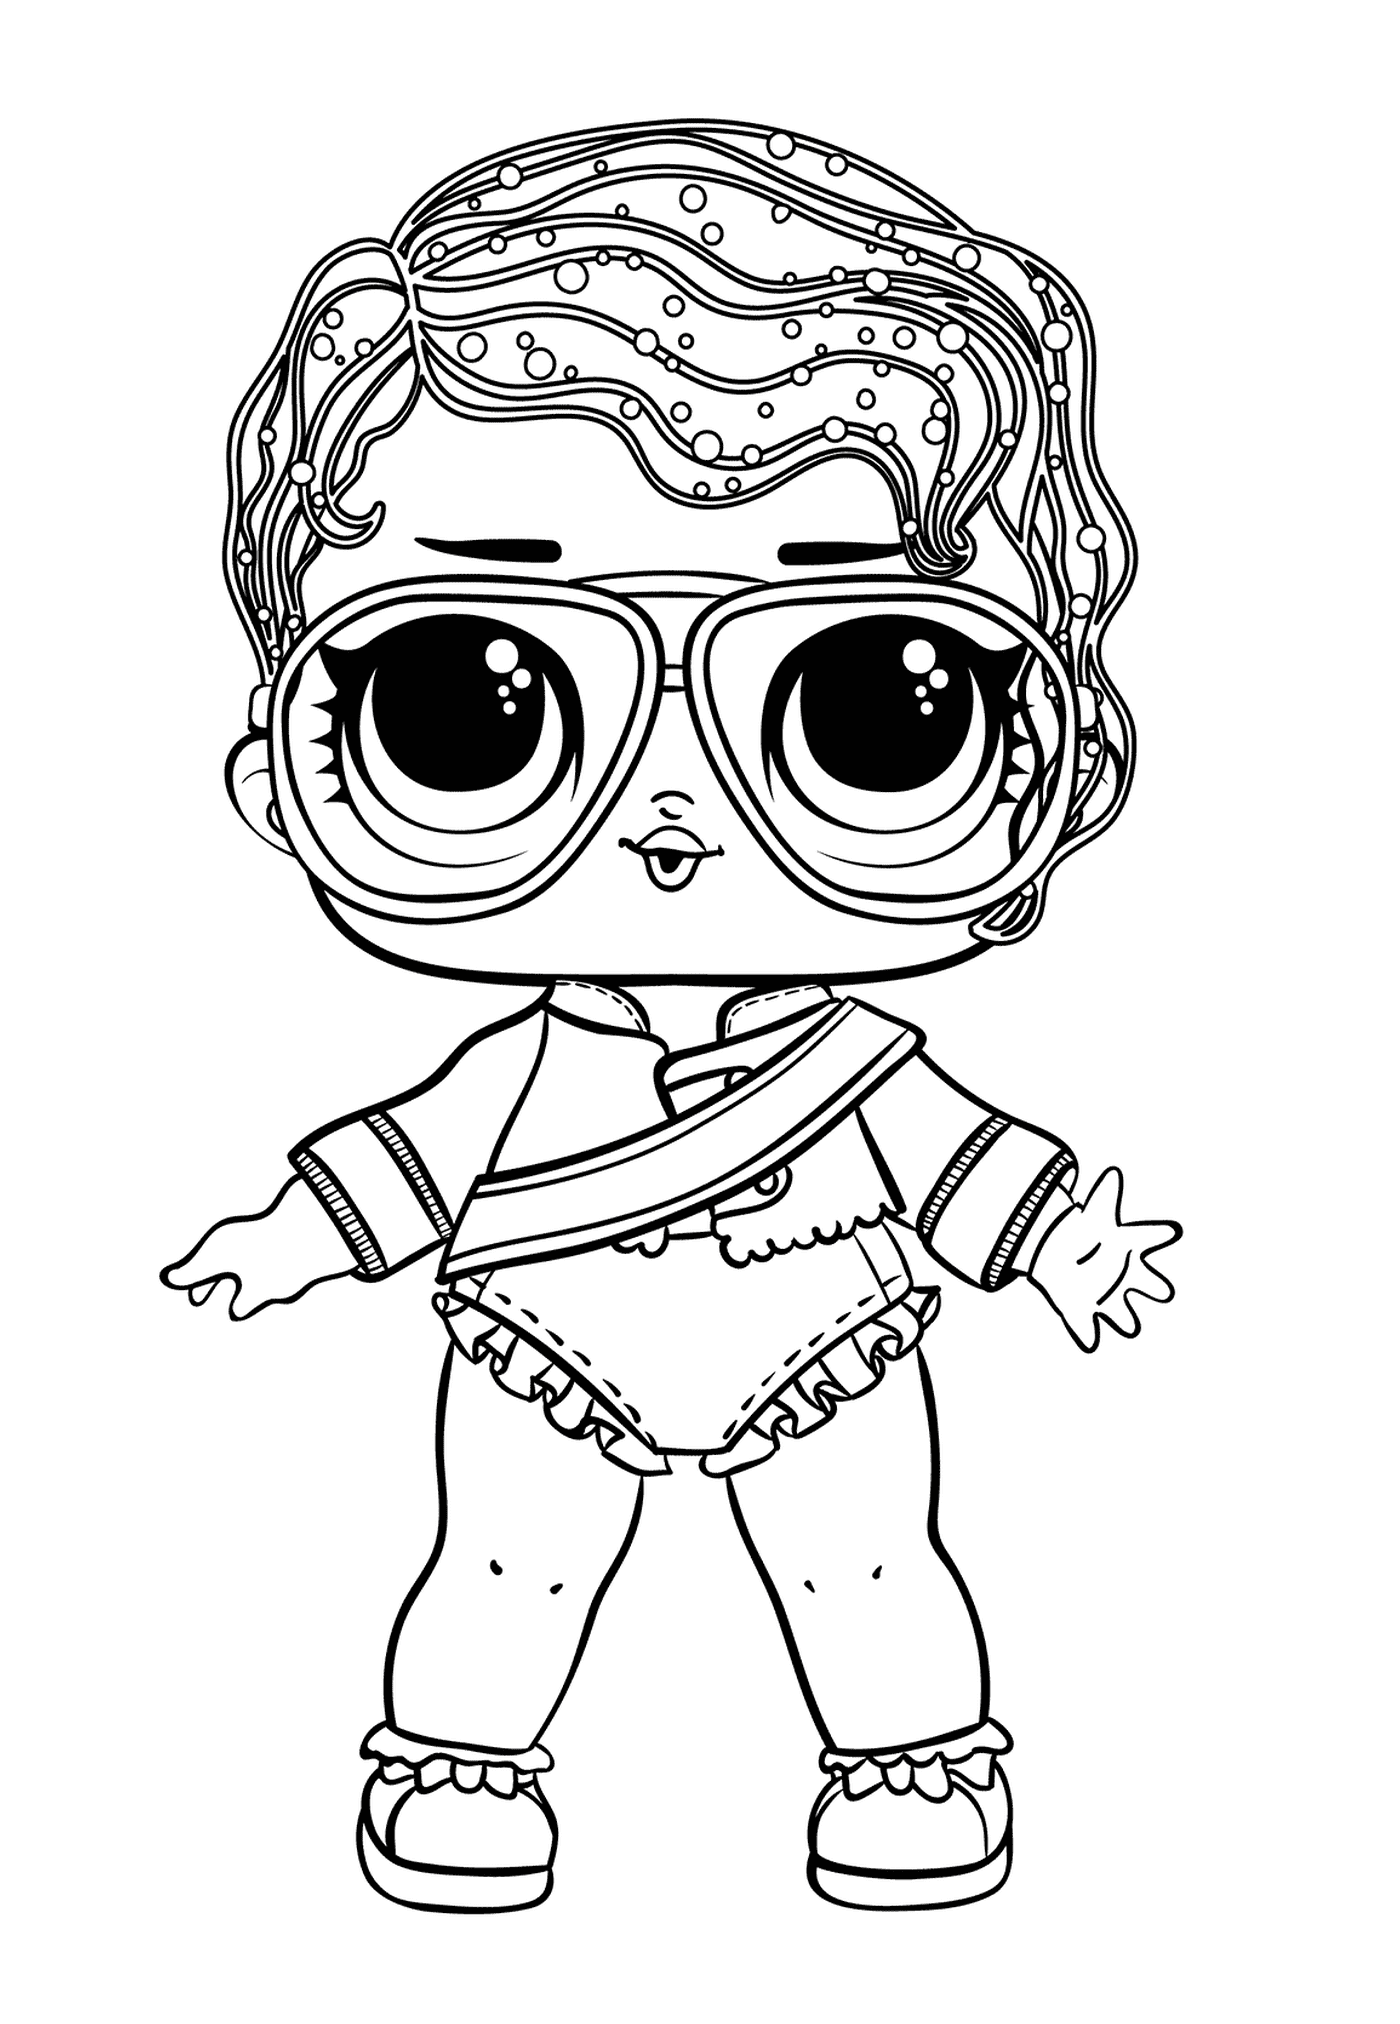  Doll with glasses 